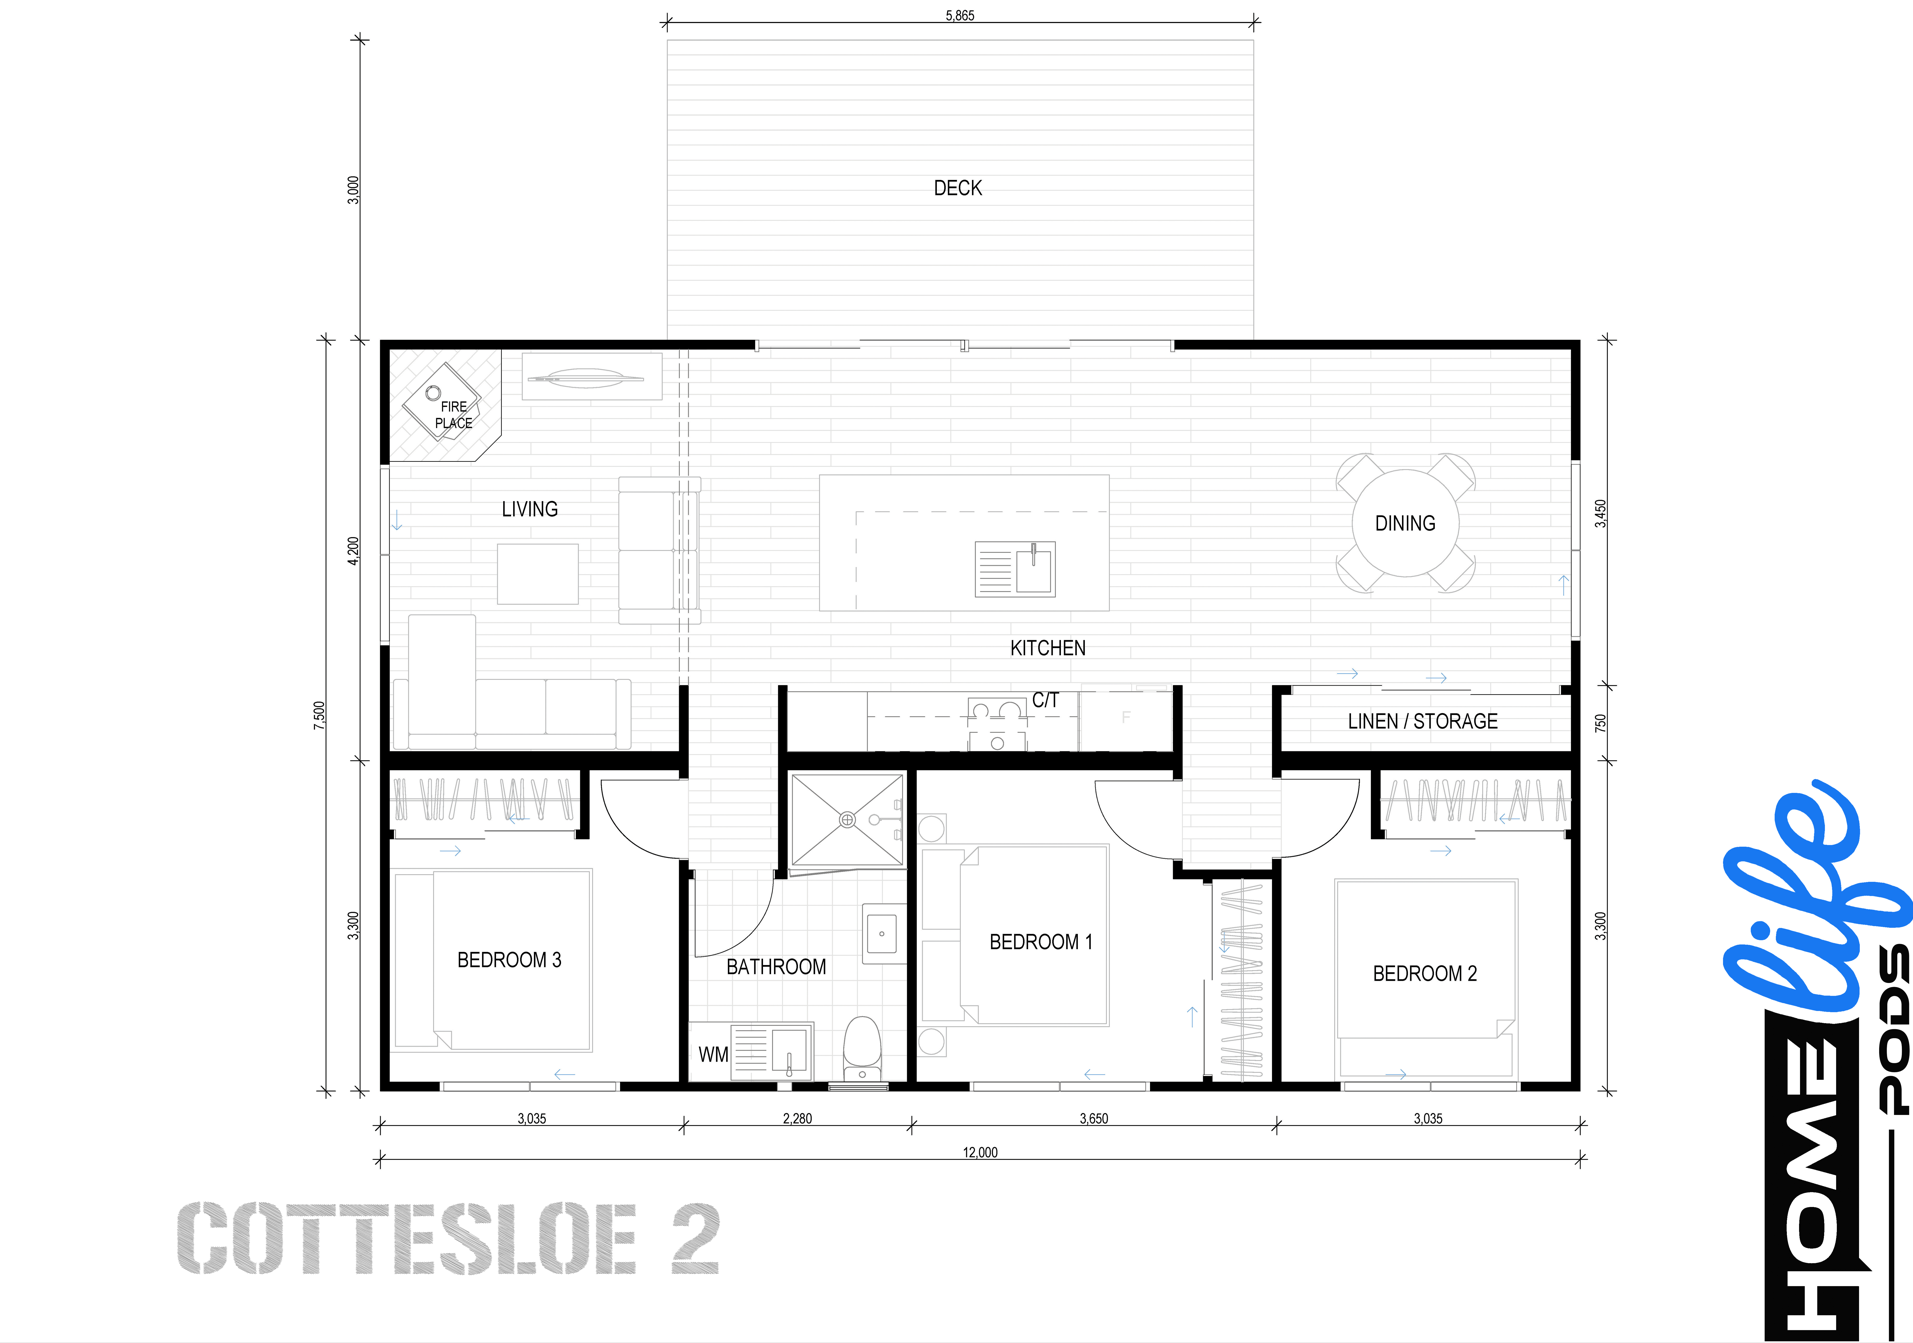 floor plan of cottesloe home or cabin style modular building